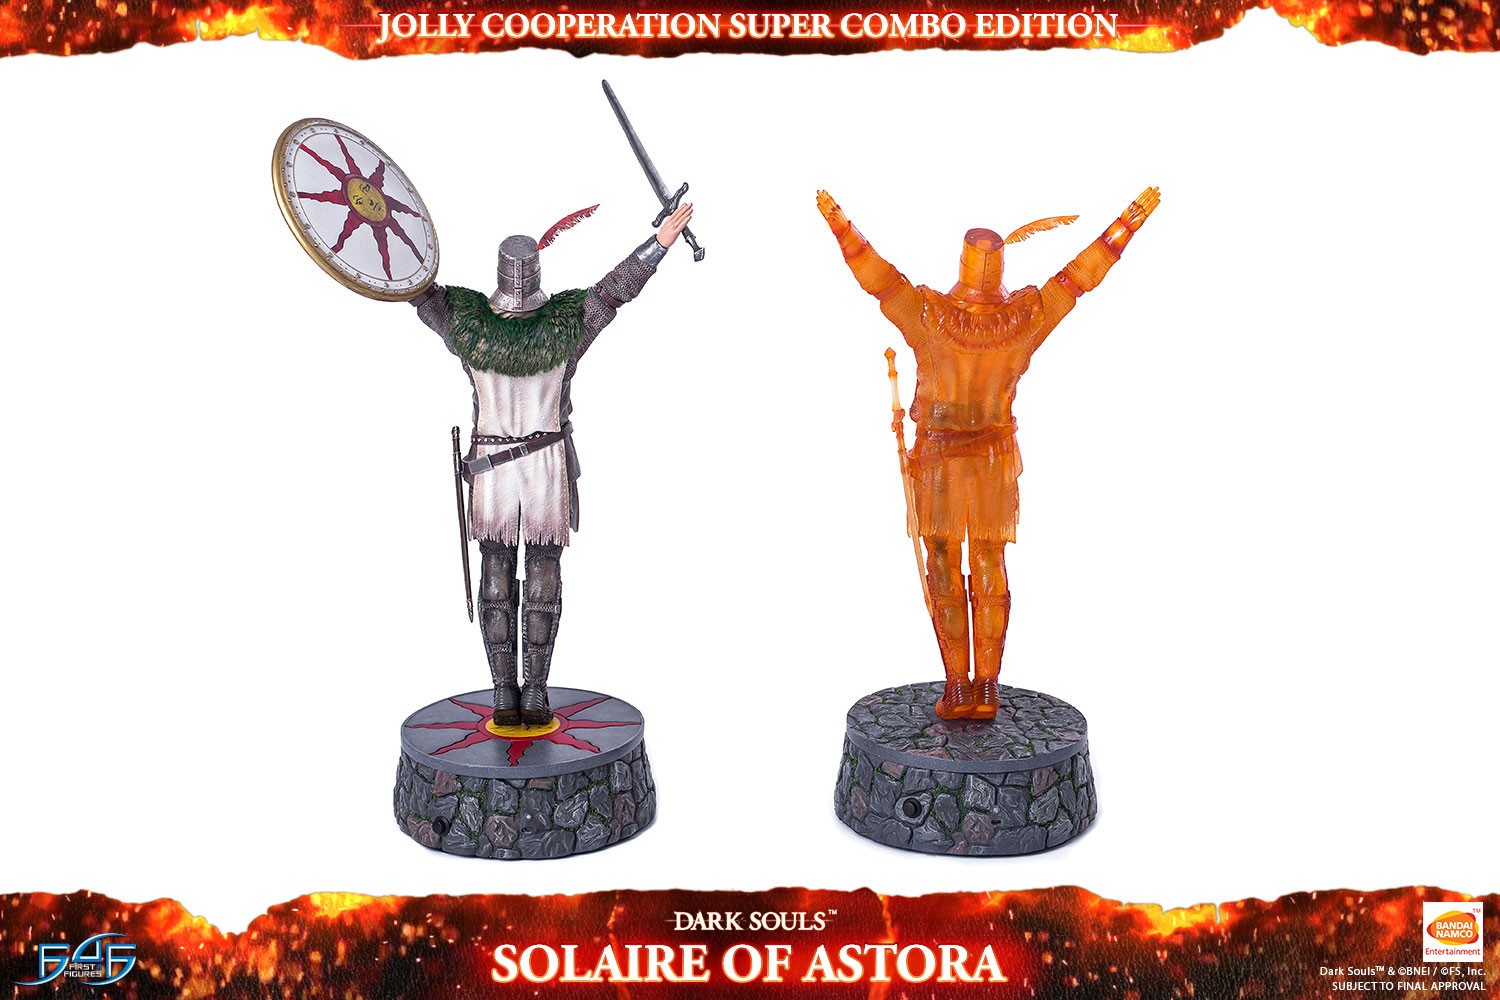 Solaire of Astora Jolly Cooperation Super Combo Edition1500 x 1000